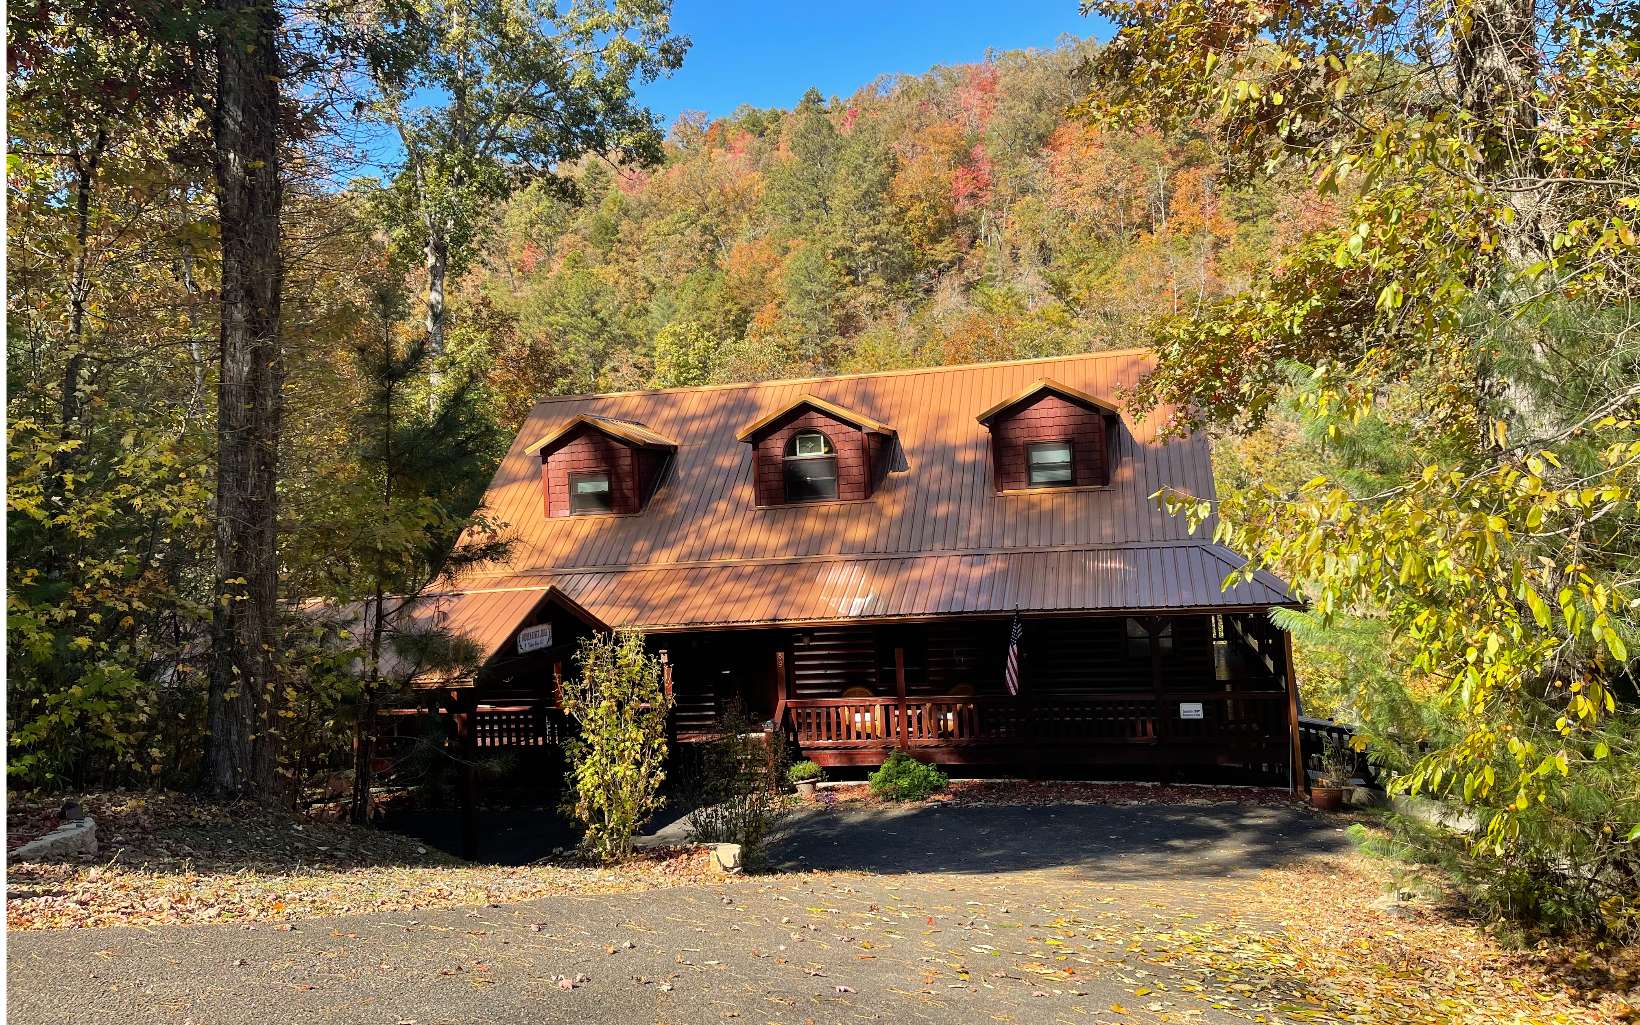 This exquisitely maintained Rustic Lodge boasts over 250 ft of WATERFRONT property in Talking Rock Creek Resort. This home has it all! The main entry/ foyer opens up into a grand living area with fireplace and open kitchen with island. Primary suite with bath, mudroom, laundry/ pantry off of kitchen and another room for office or den area. Upstairs offers another Primary suite with bath, loft with game, reading area overlooking the large living space. The terrace level has 9’ ceilings, separate kitchenette area, another Primary suite with bath, 2nd large living area, exercise, gaming! SO MUCH ROOM, over 4000 sq.ft.! The wrap around porches are a great way to relax and enjoy the most amazing views and sound of rushing water or you can enjoy the very walkable waterfront with fire pit and perfect place to fish, kayak swim and tube in water that leads to the Carter’s Lake area close by where you could dock your boat at the Marina. Less than 90 minutes to Atlanta makes this home the perfect year-round home or weekend getaway! This home is ‘turn-key’ ready for you and your guests. Just a short drive to many local wineries and breweries.